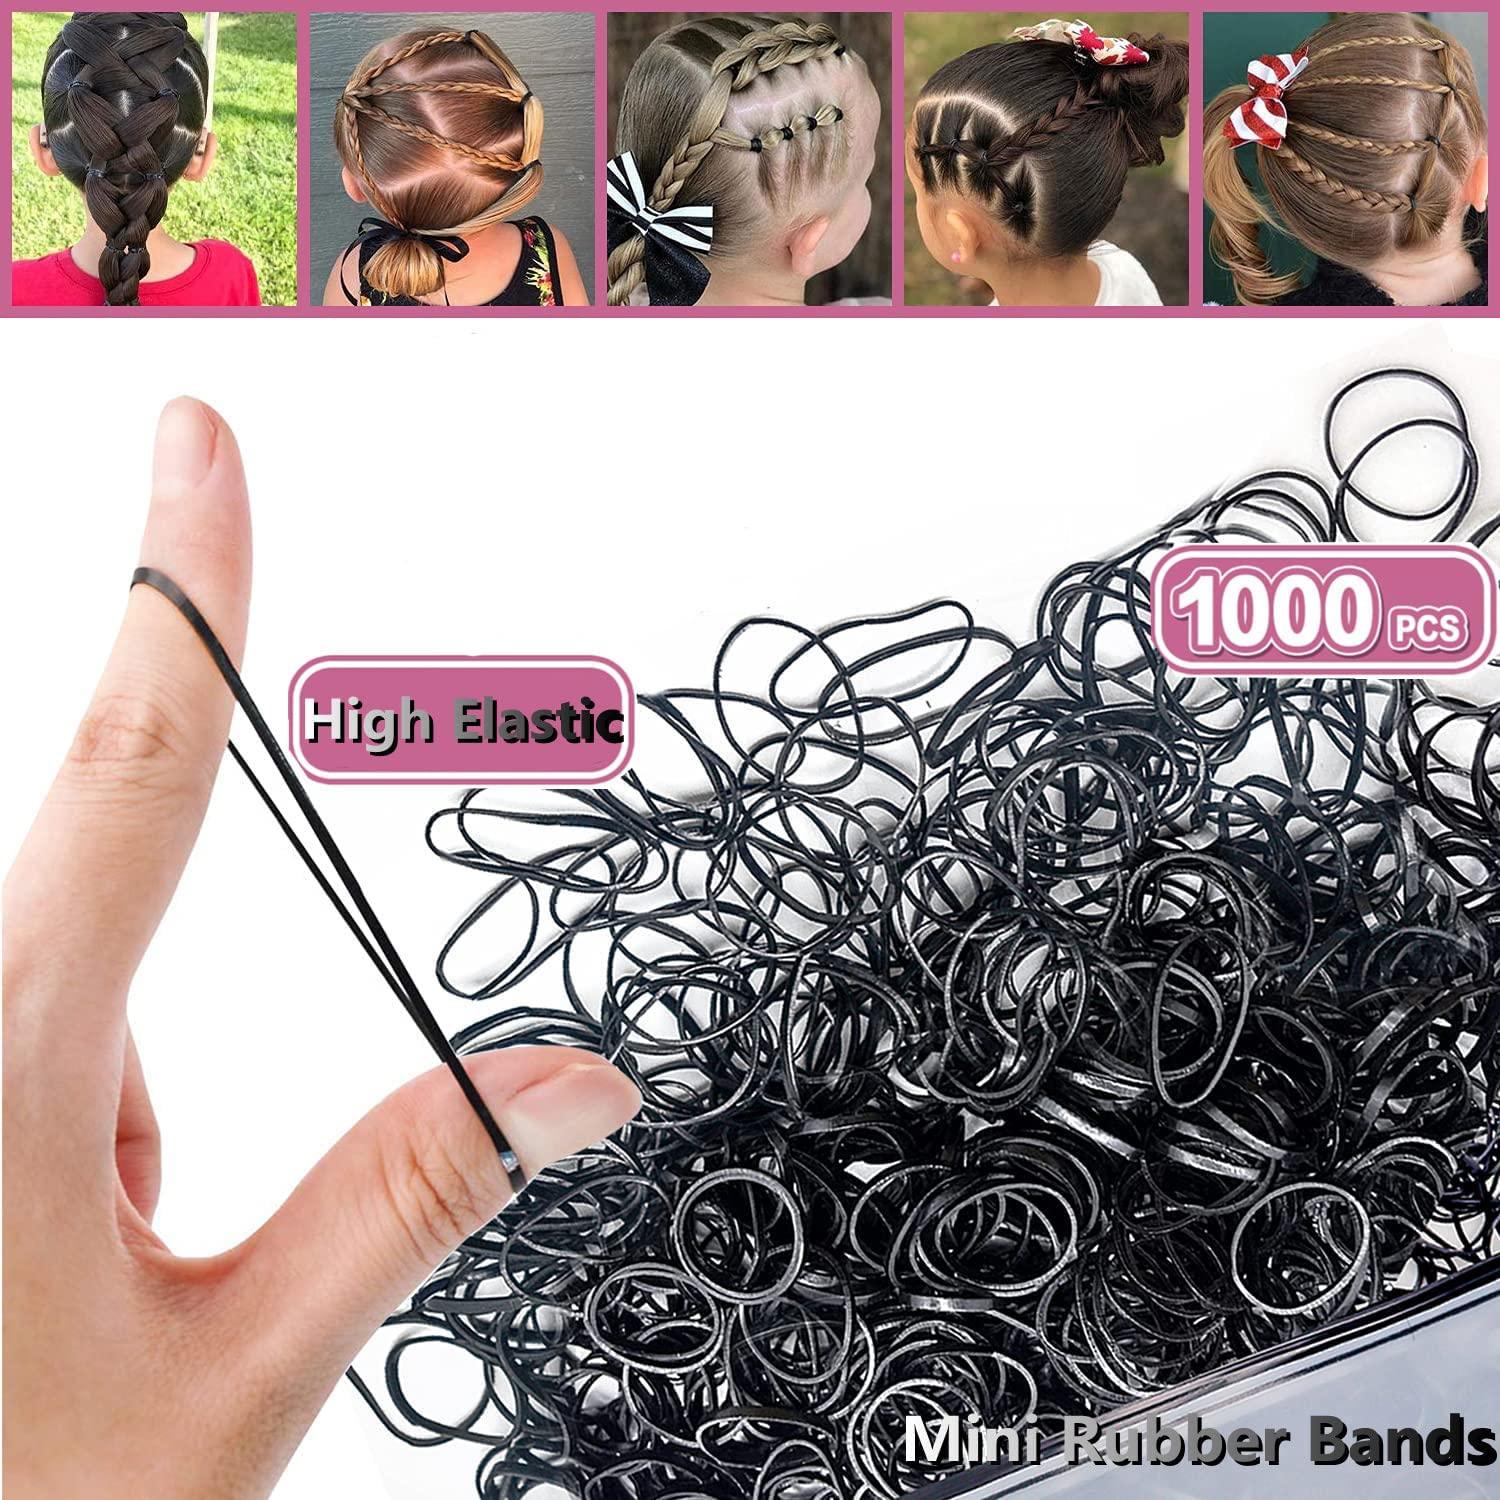 Mini Rubber Bands (Black or Assorted Colors) -Carlie's Beauty Supply LLC